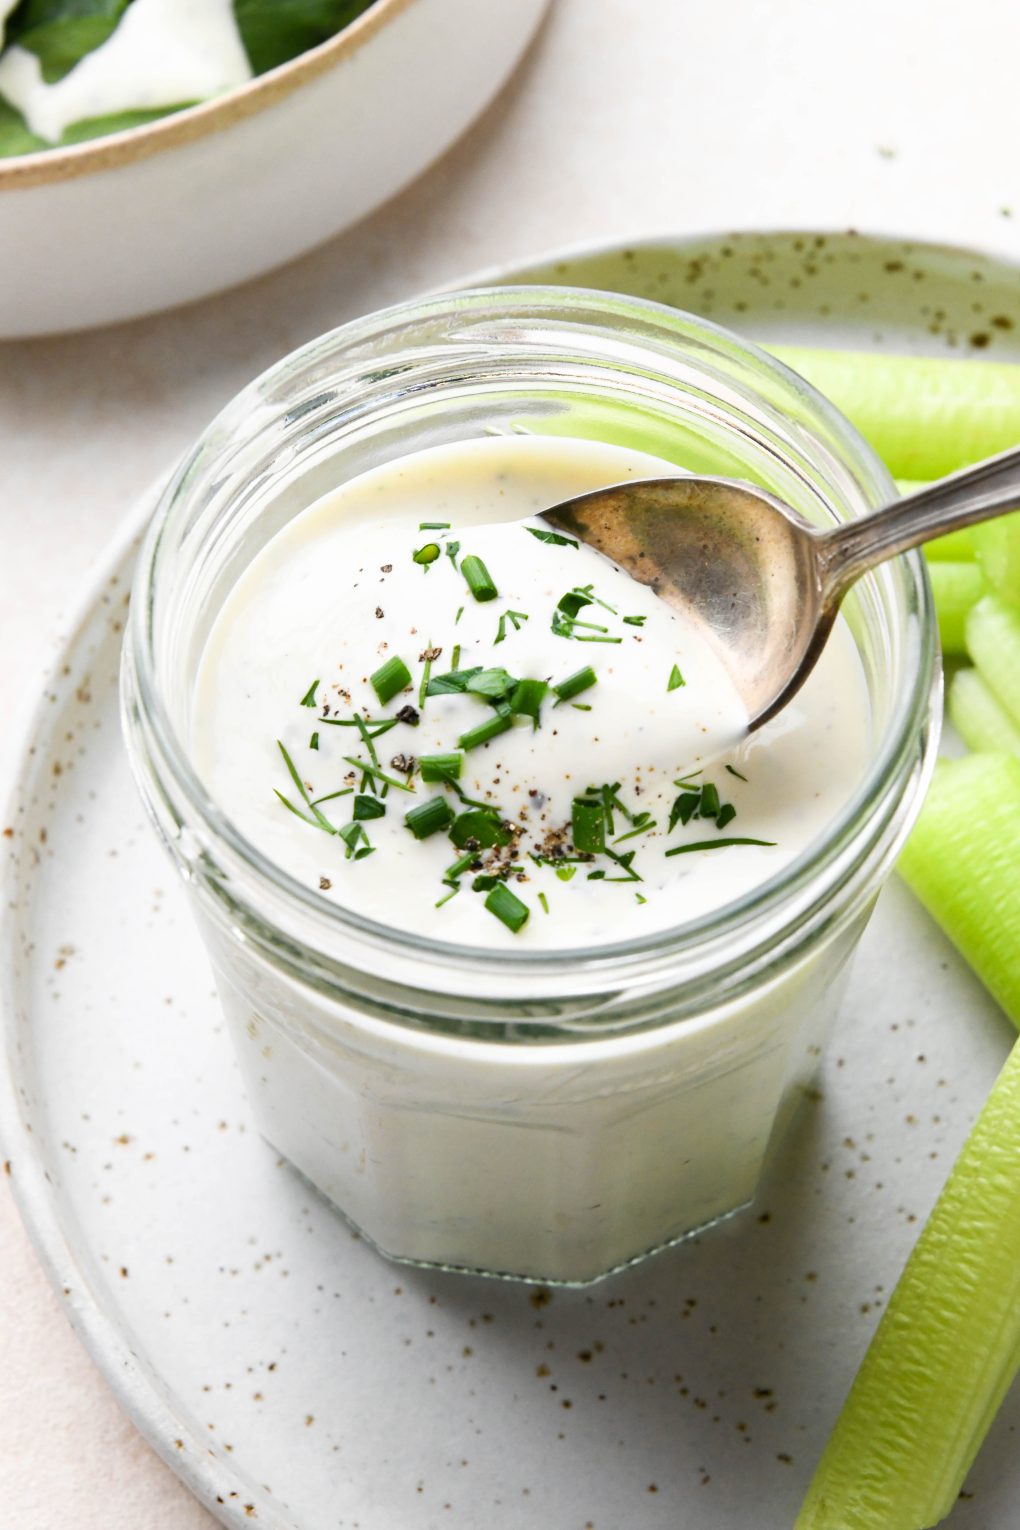 Dairy free ranch dressing in a small glass jar next to celery sticks with a spoon dipping into the dressing. On a cream colored background.